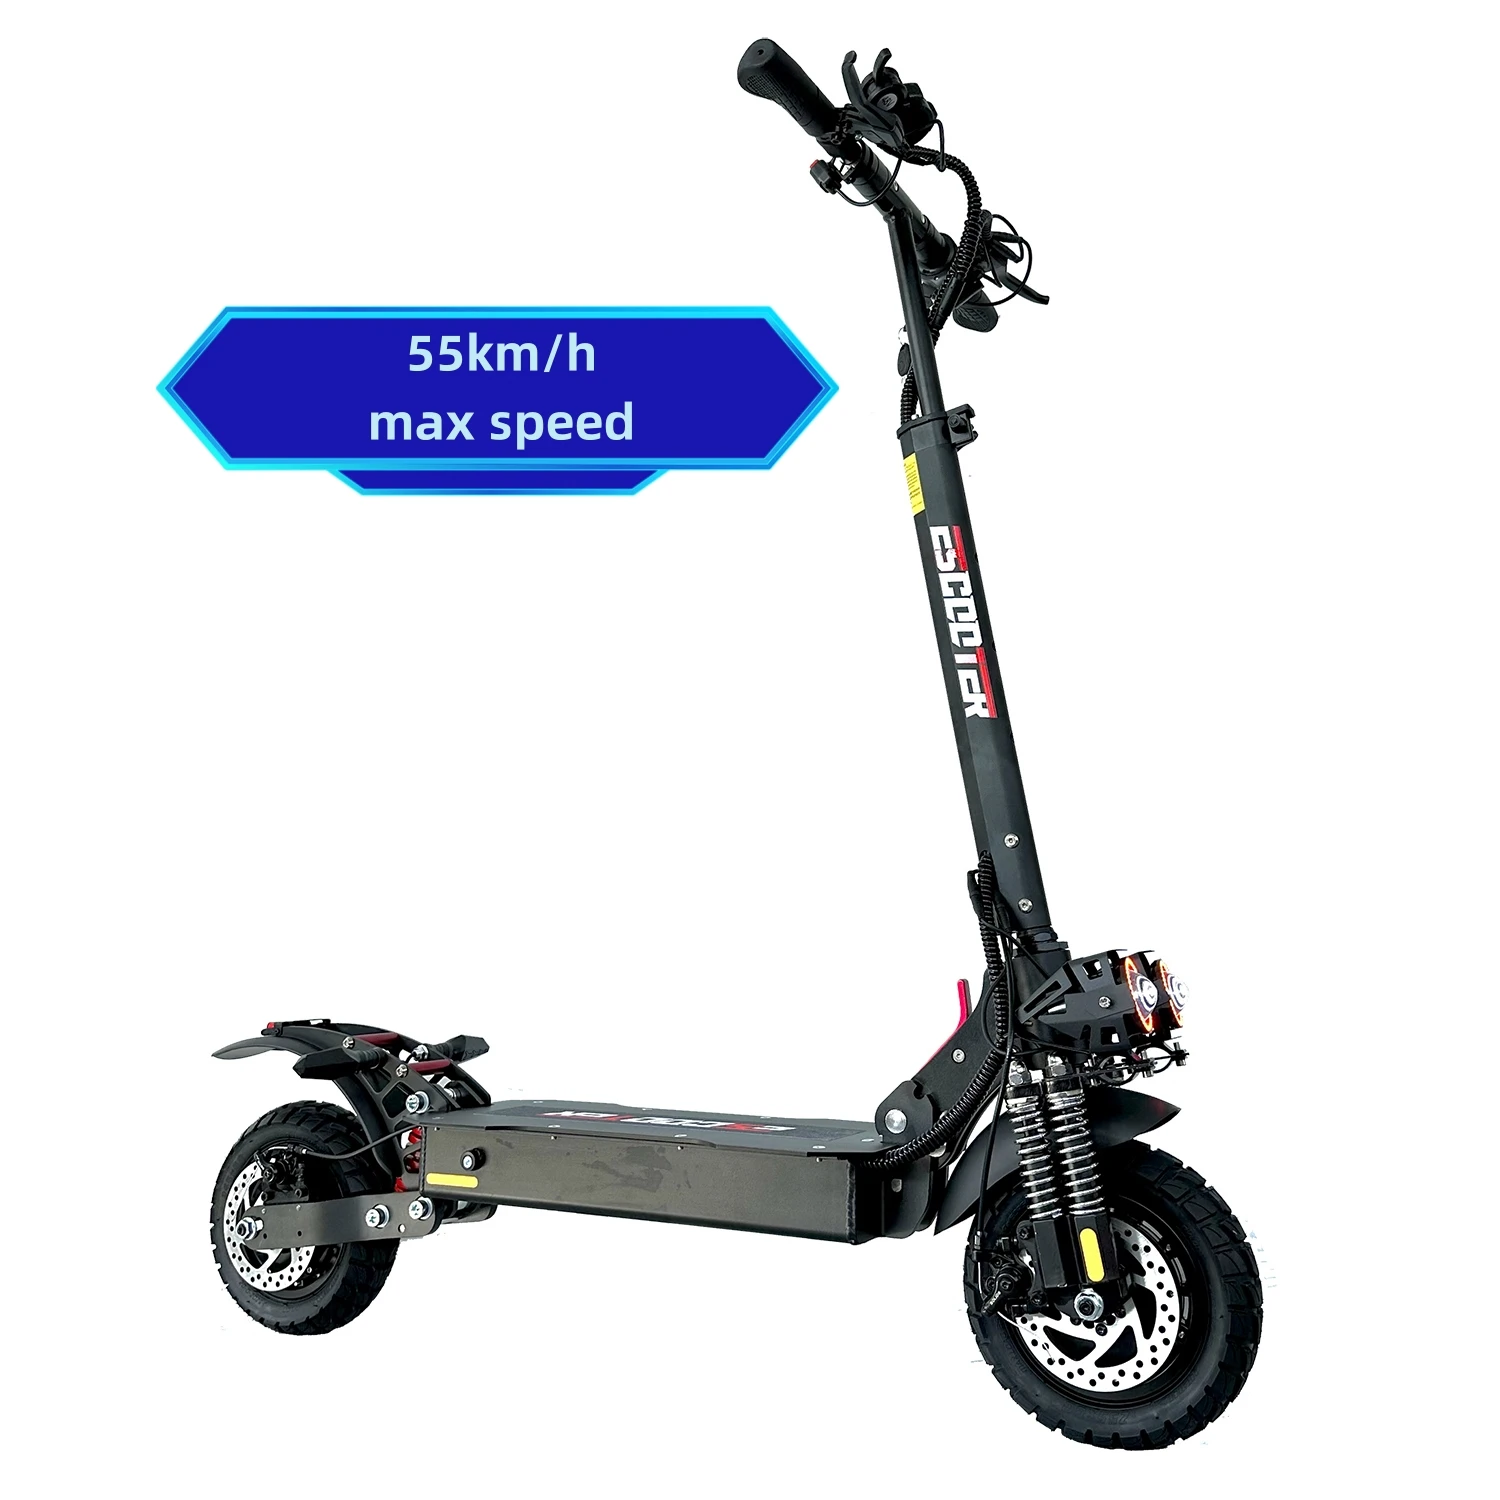 

USA warehouse stock Dual motor E Scooter 48v 1200w 2400w 10inch 55km/h Electric Scooter 150kg max load locks key